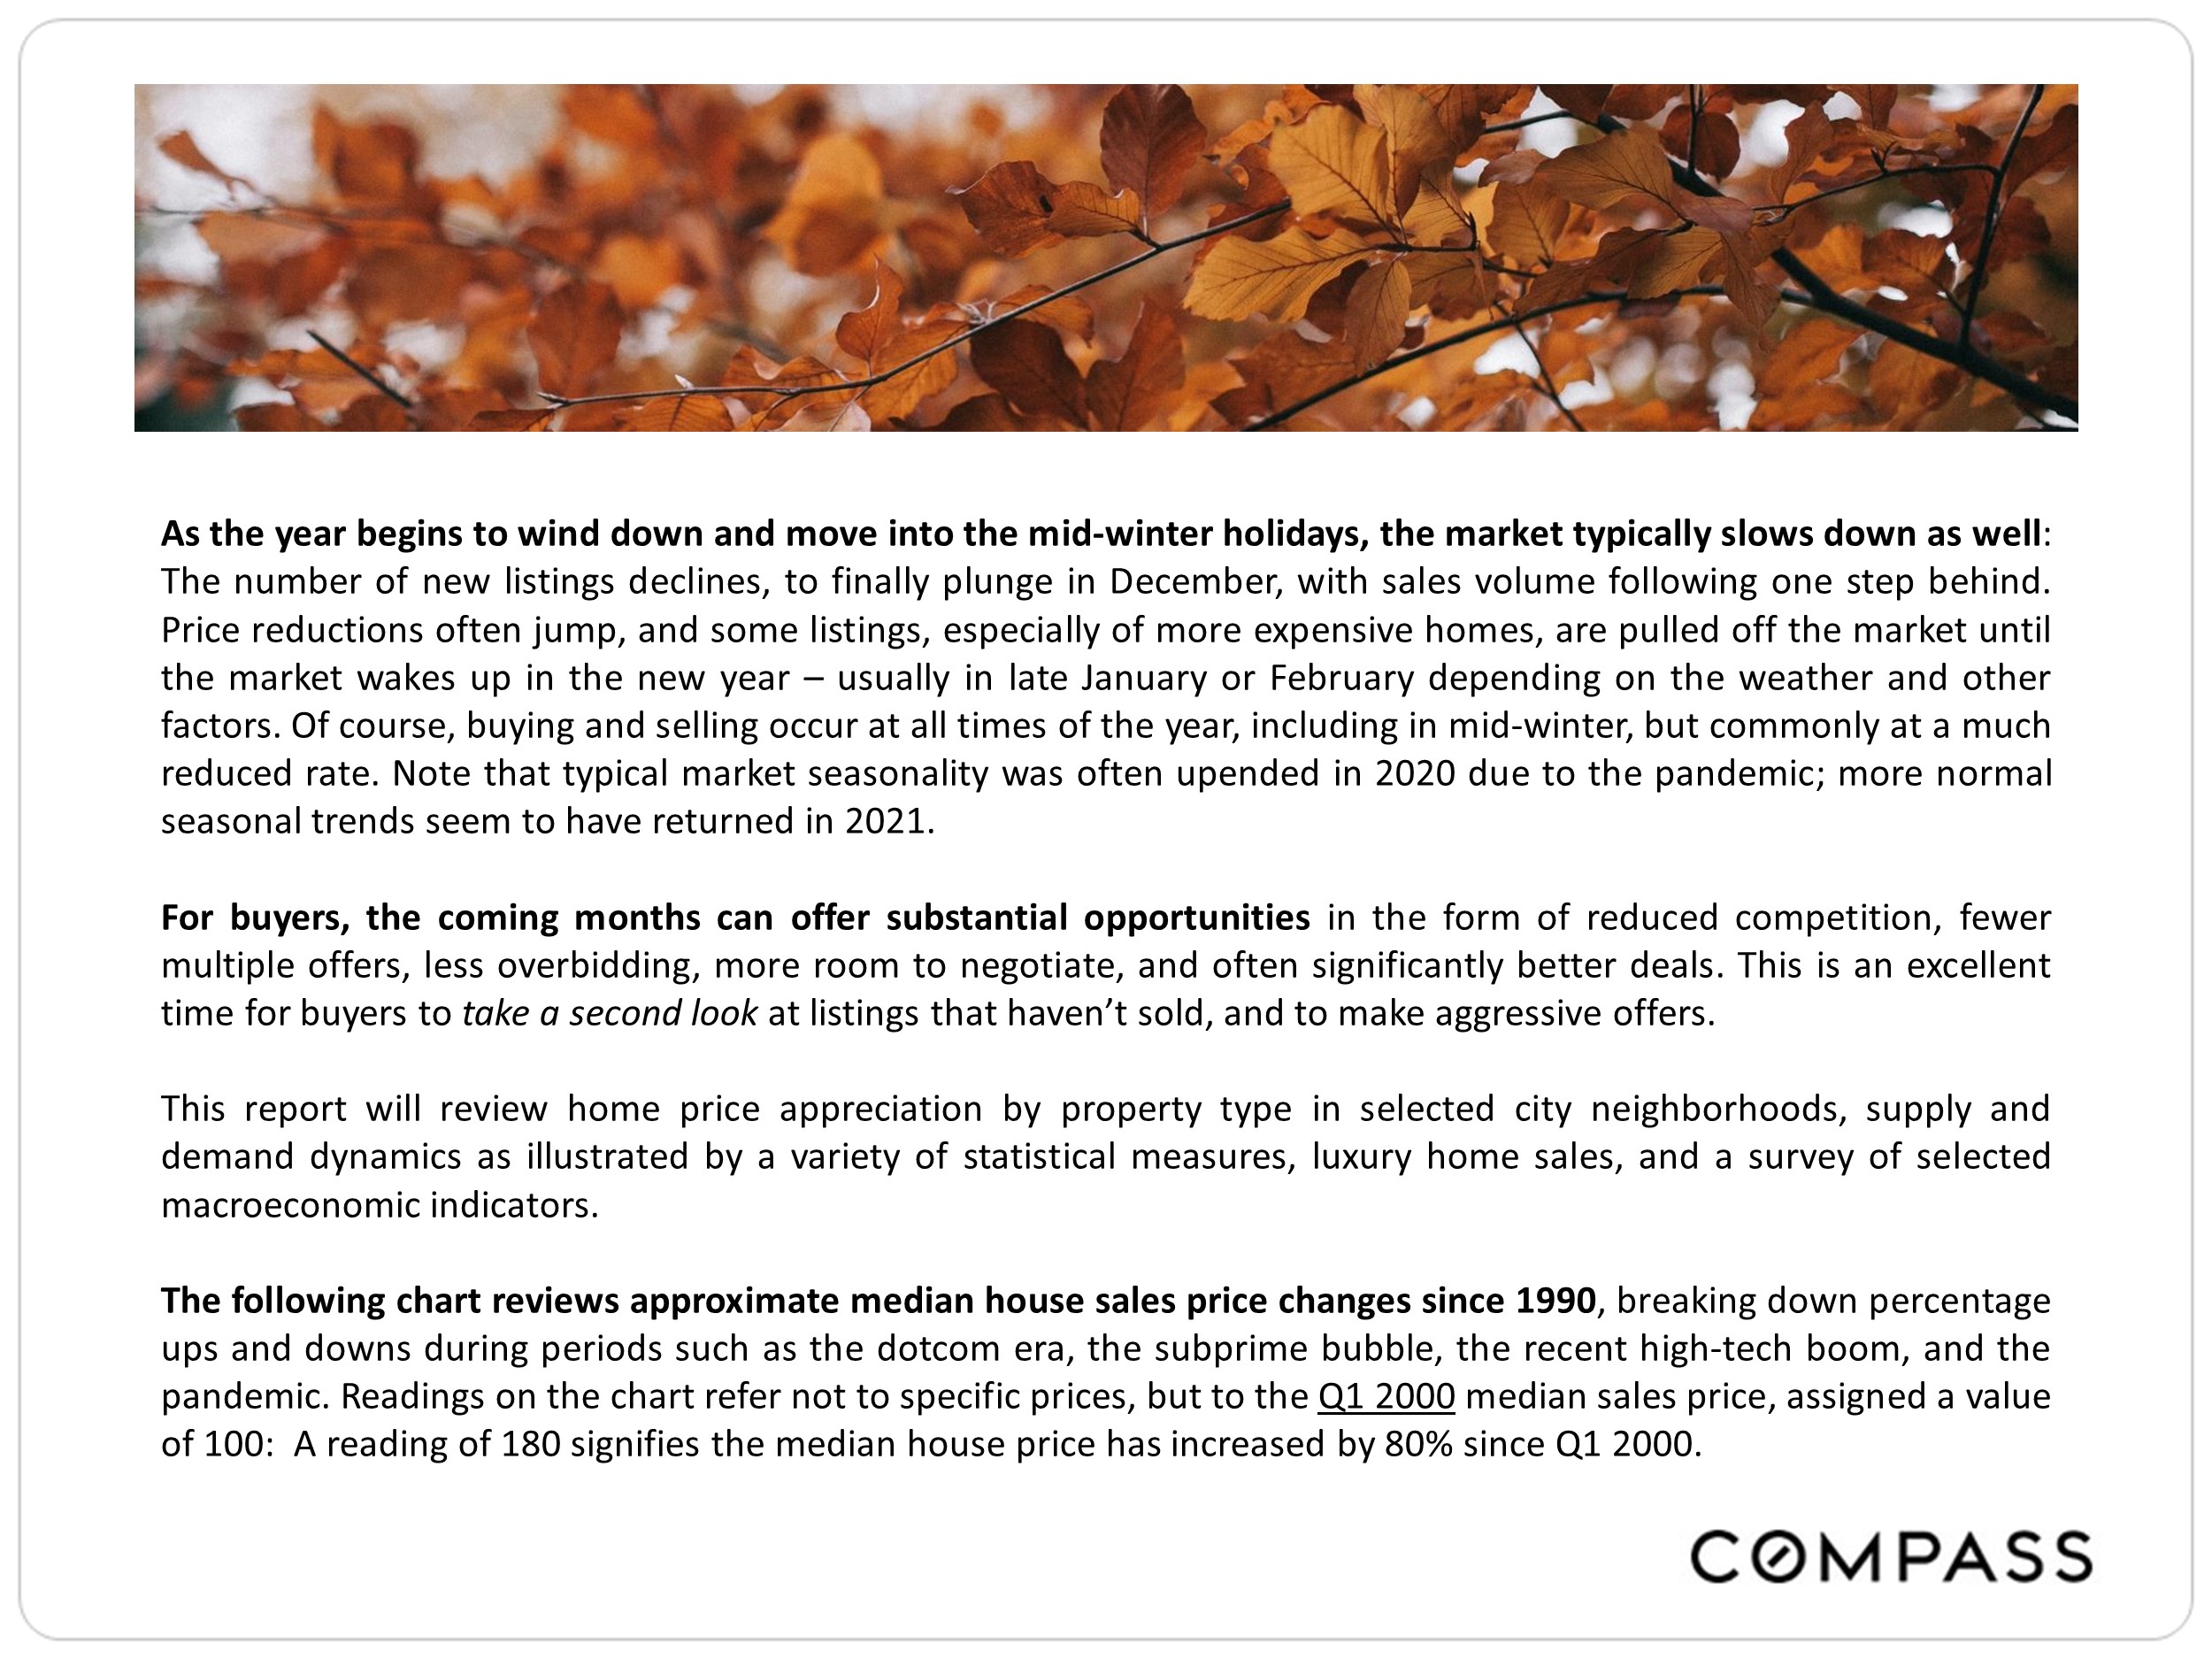 banner photo of fall leaves and paragraphs describing the market seasonality